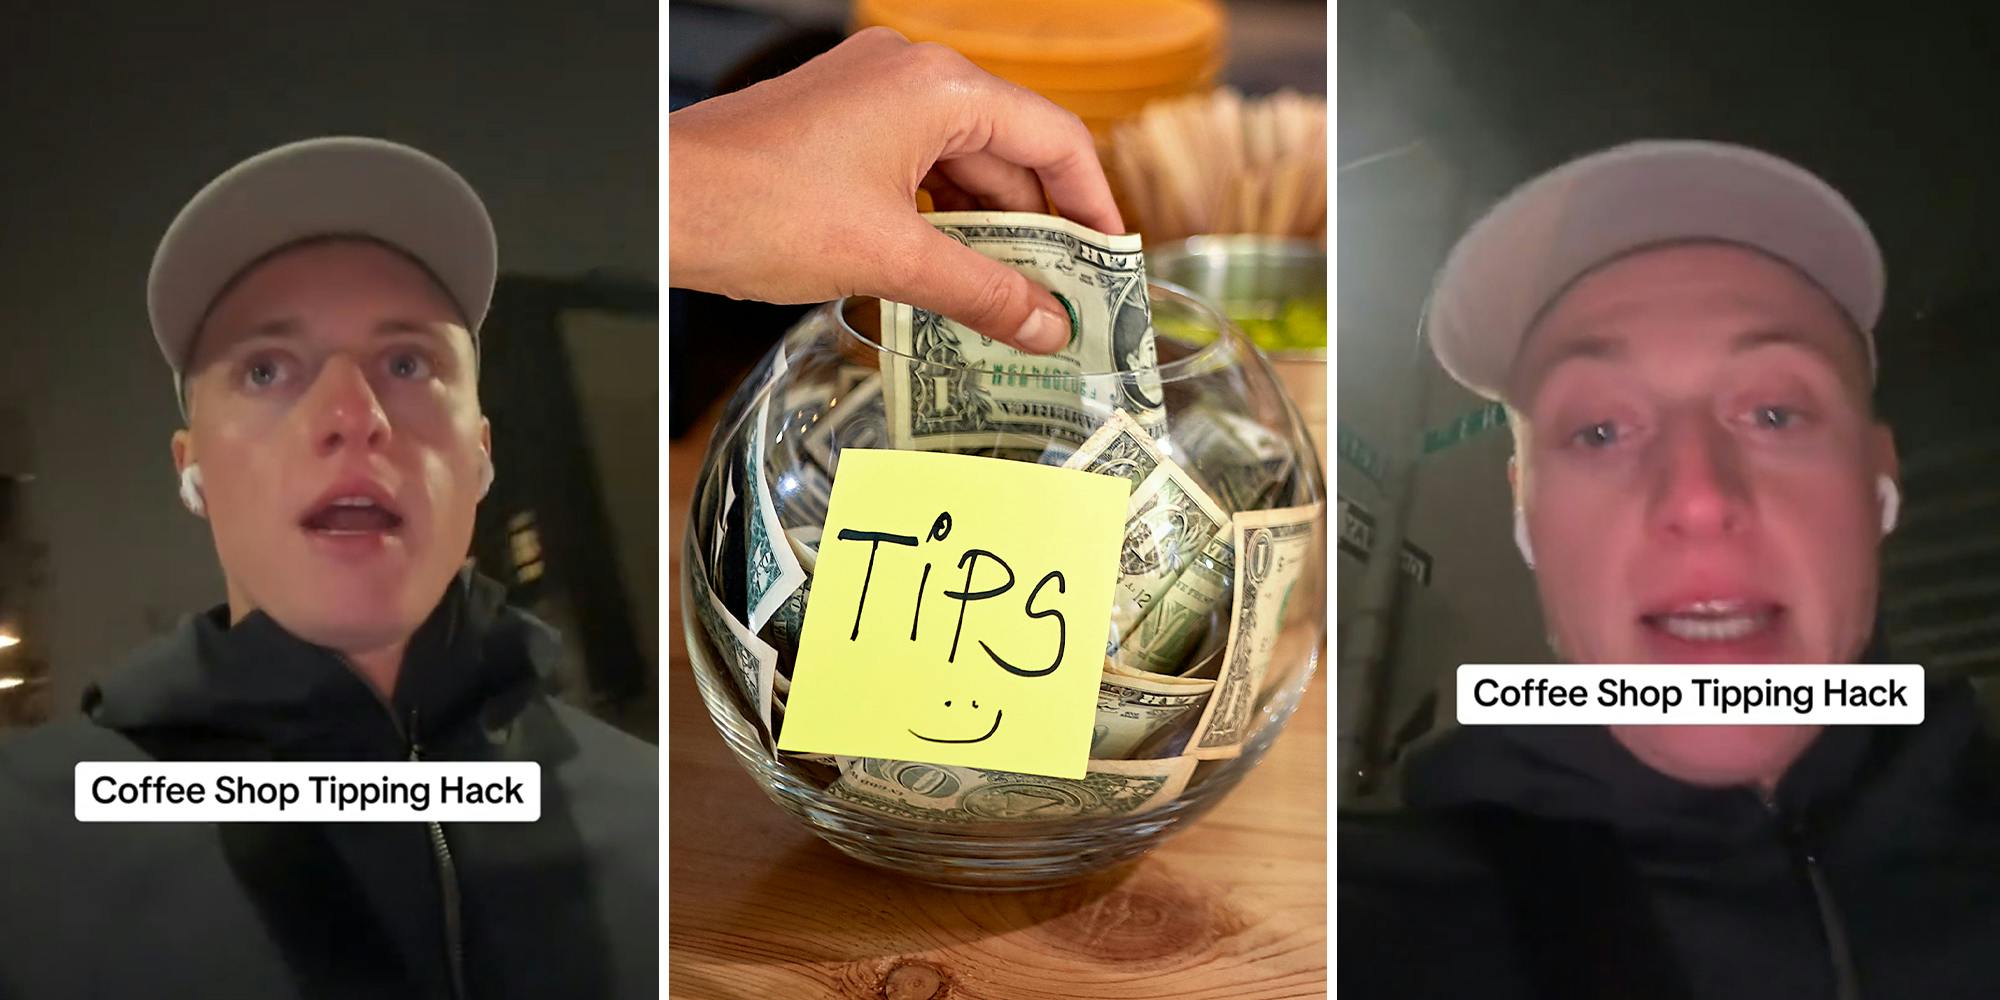 Man says he tricks workers into thinking he’s tipping them, shares how